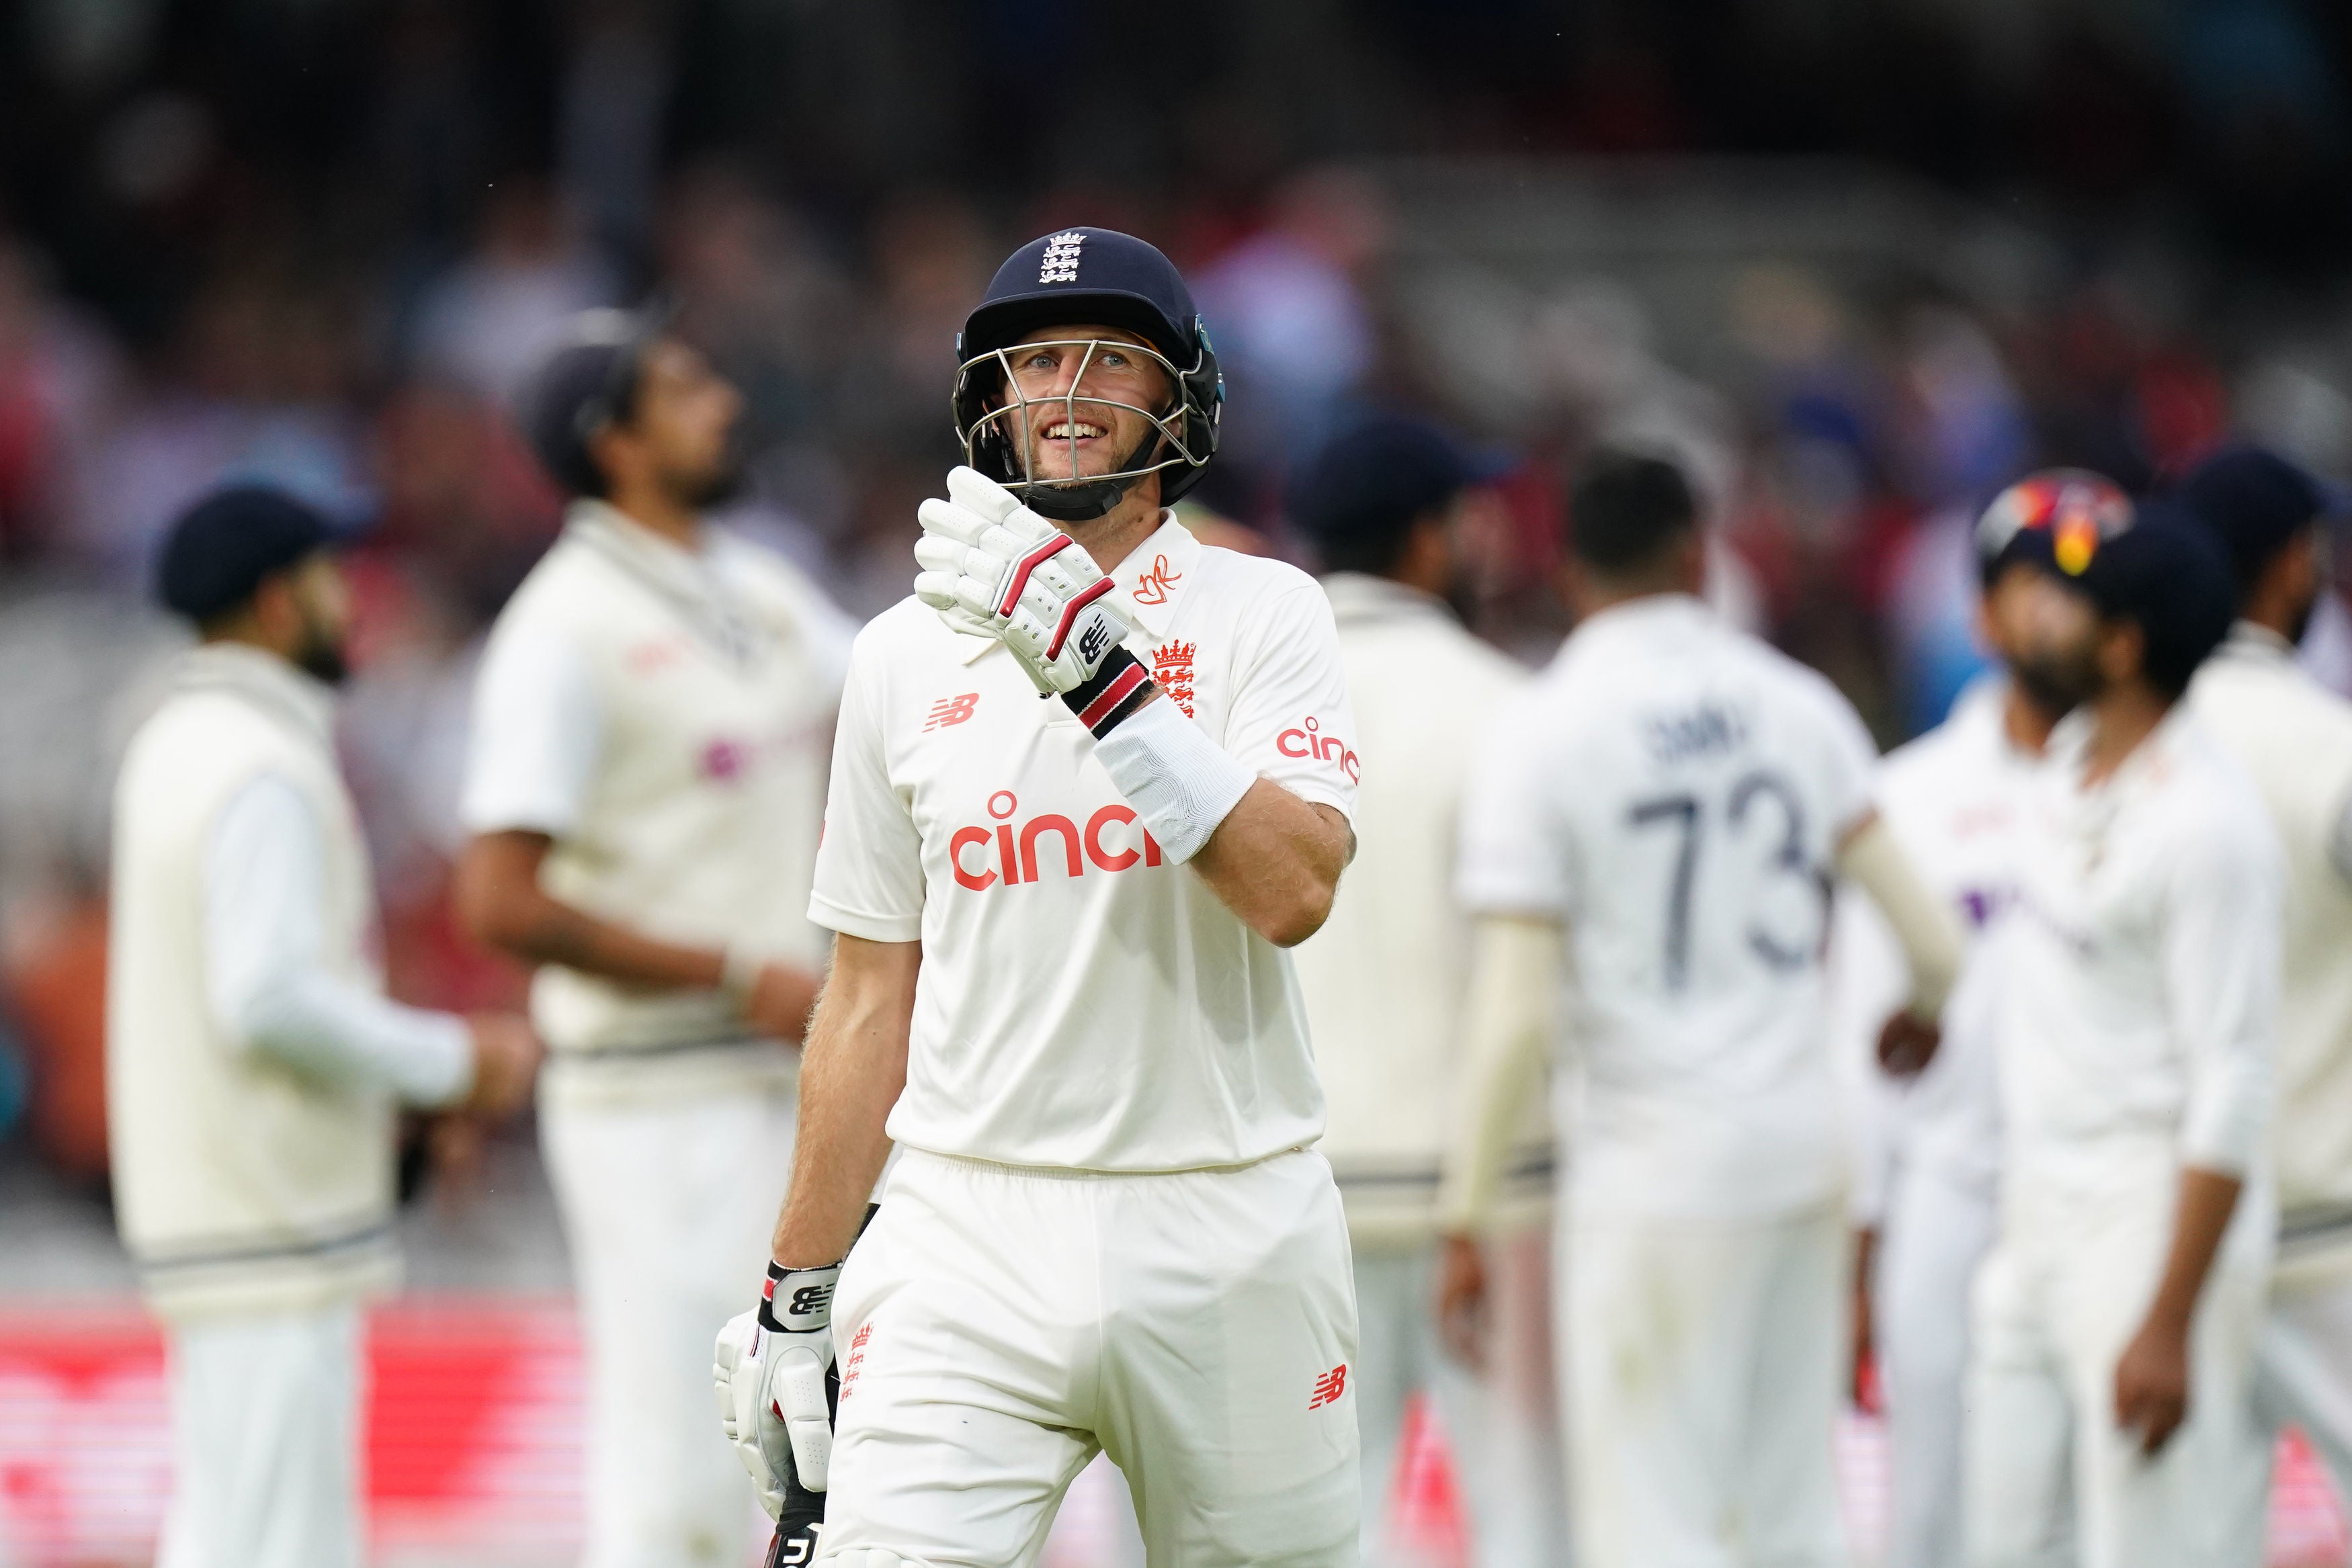 Joe Root ended day two unbeaten at the crease